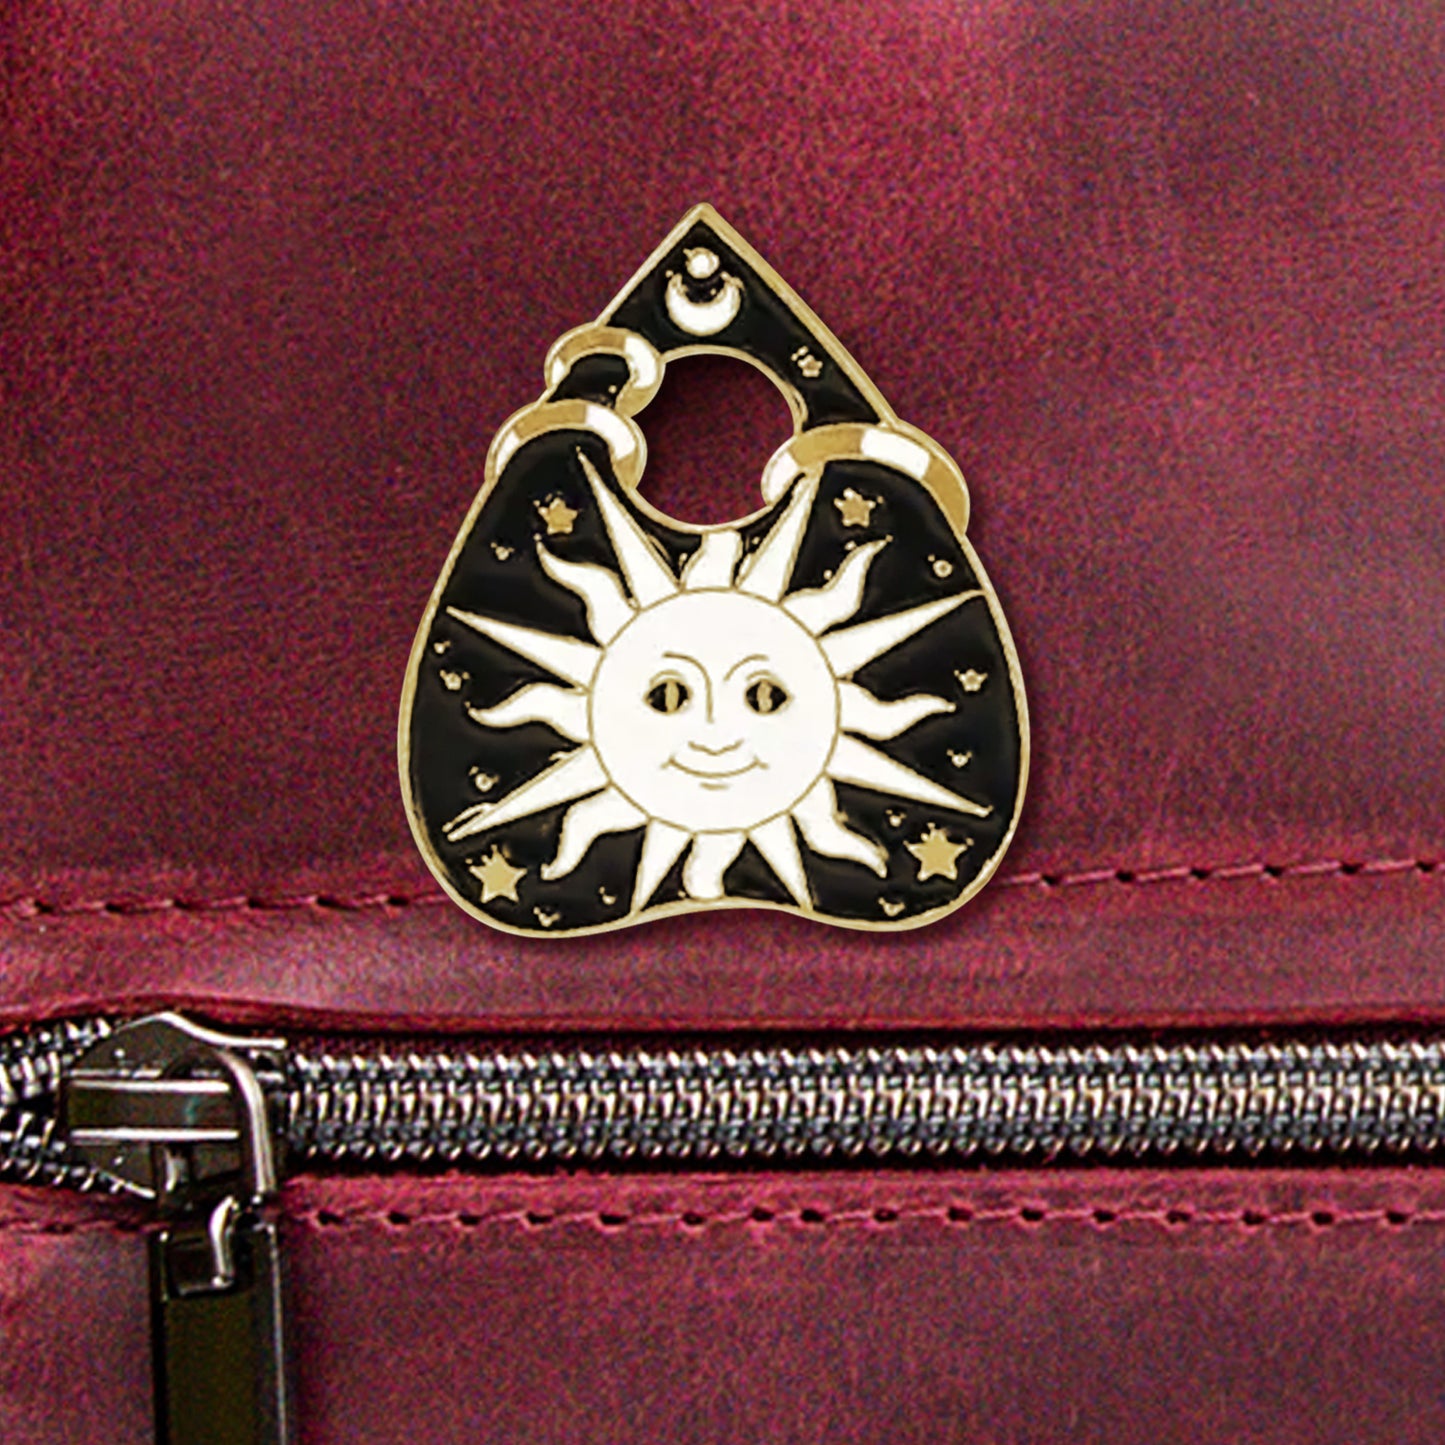 A close-up photo of a black-and-gold enamel pin in the shape of a planchette. The pin depicts a large white sun in a tarot-like art style, surrounded by small gold stars.